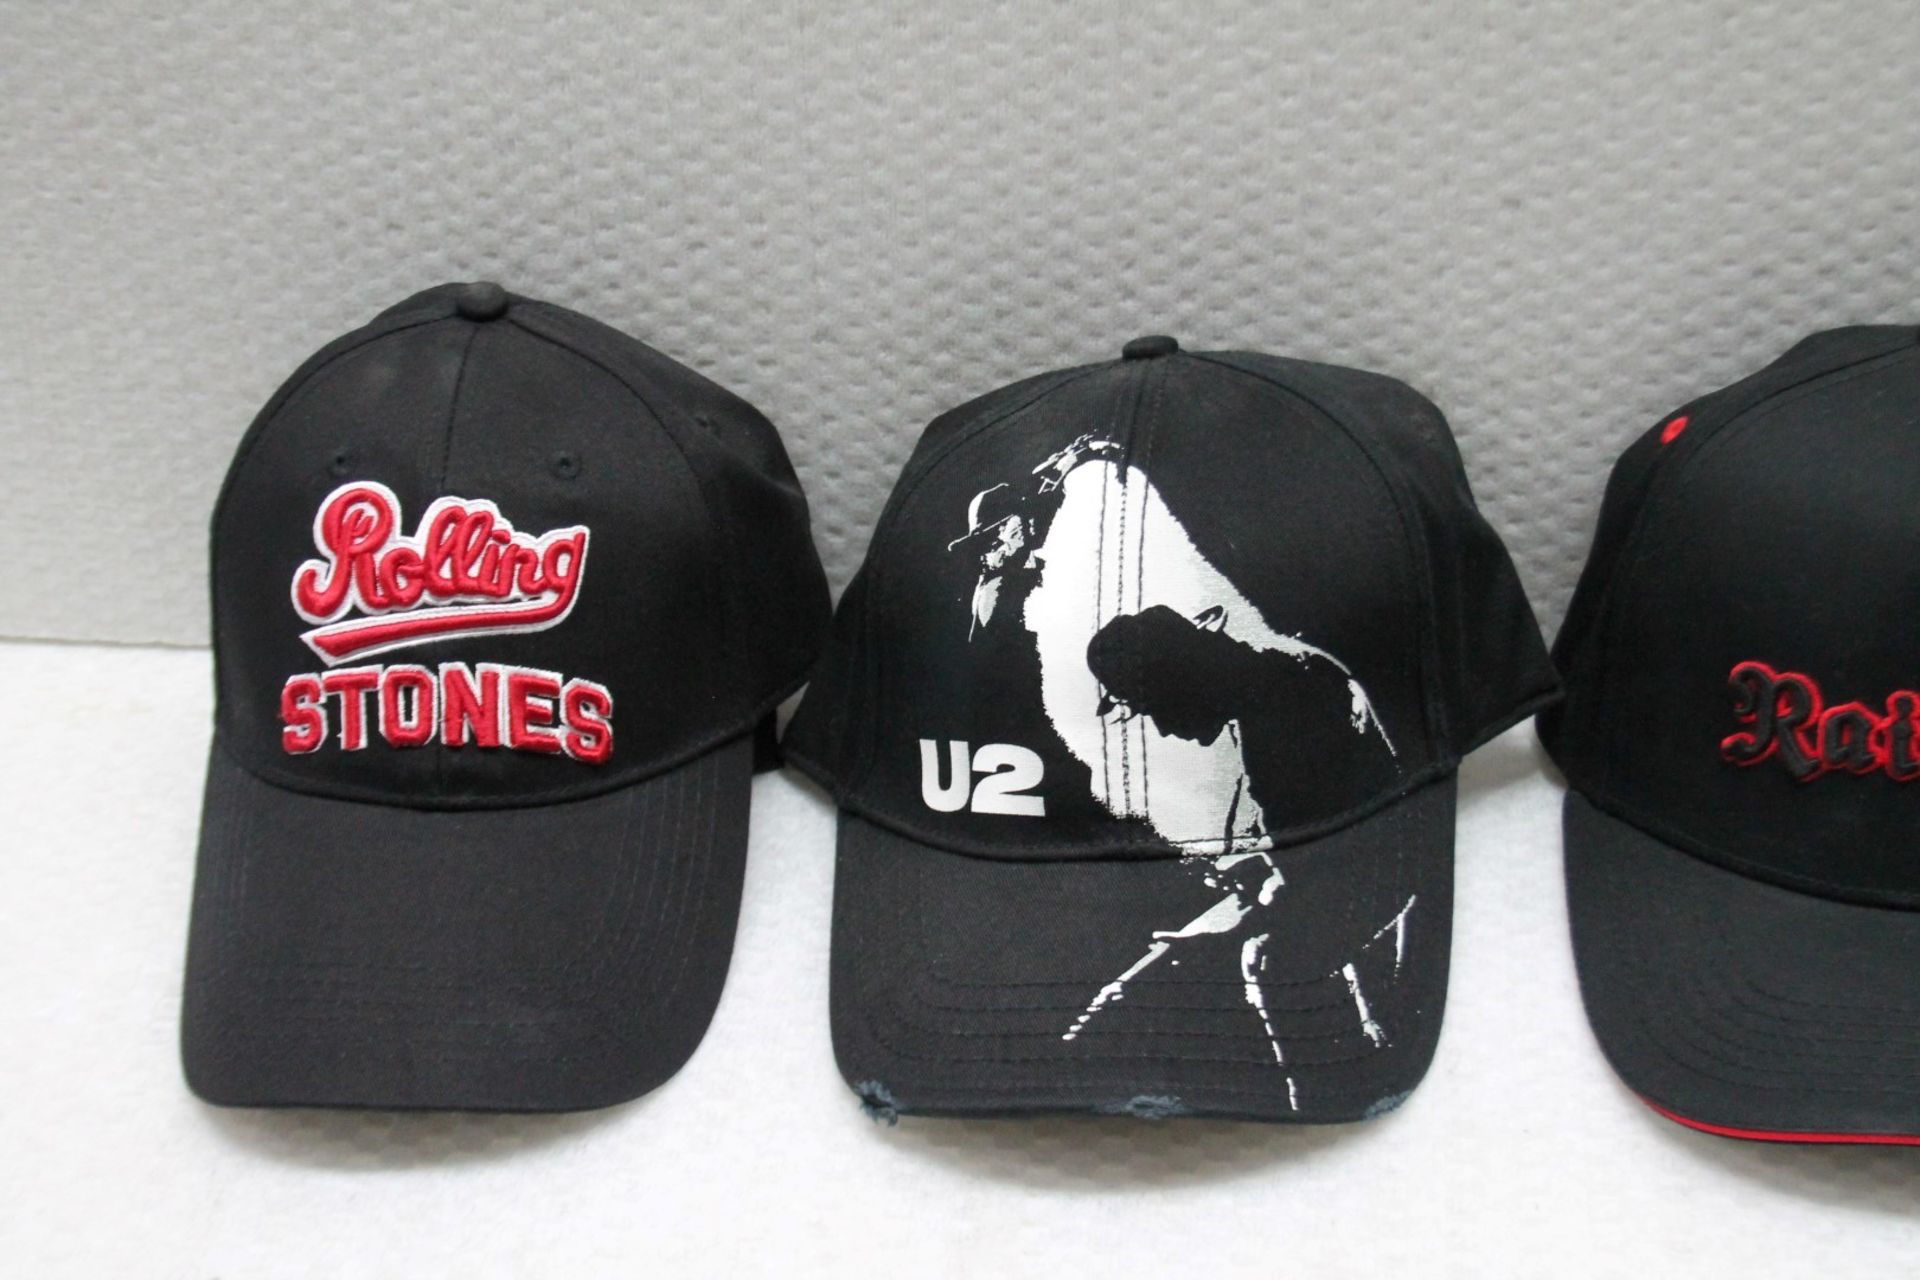 4 x Assorted Baseball Cap Featuring ACDC, Rolling Stones, Rainbow and U2 - Colour: Black - One Size - Image 4 of 6